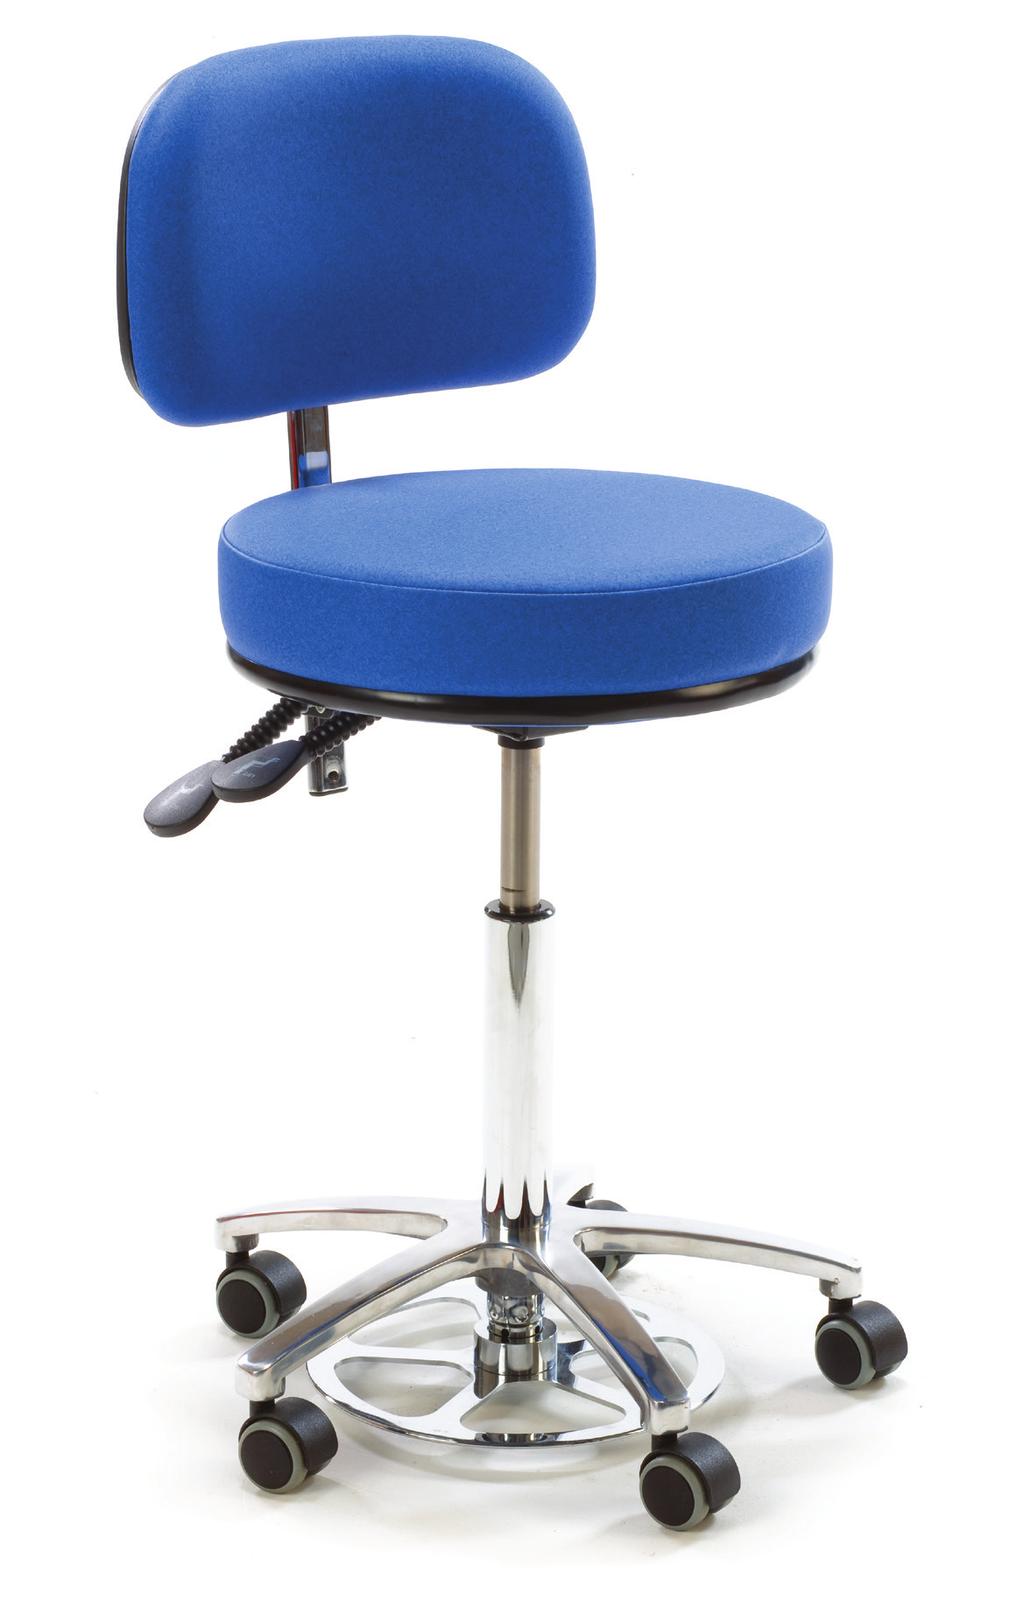 MEDIC General Medical Chairs 150Kg Suitable for a wide range of medical procedures, these chairs provide comfort and support for clinicians sitting for long periods.